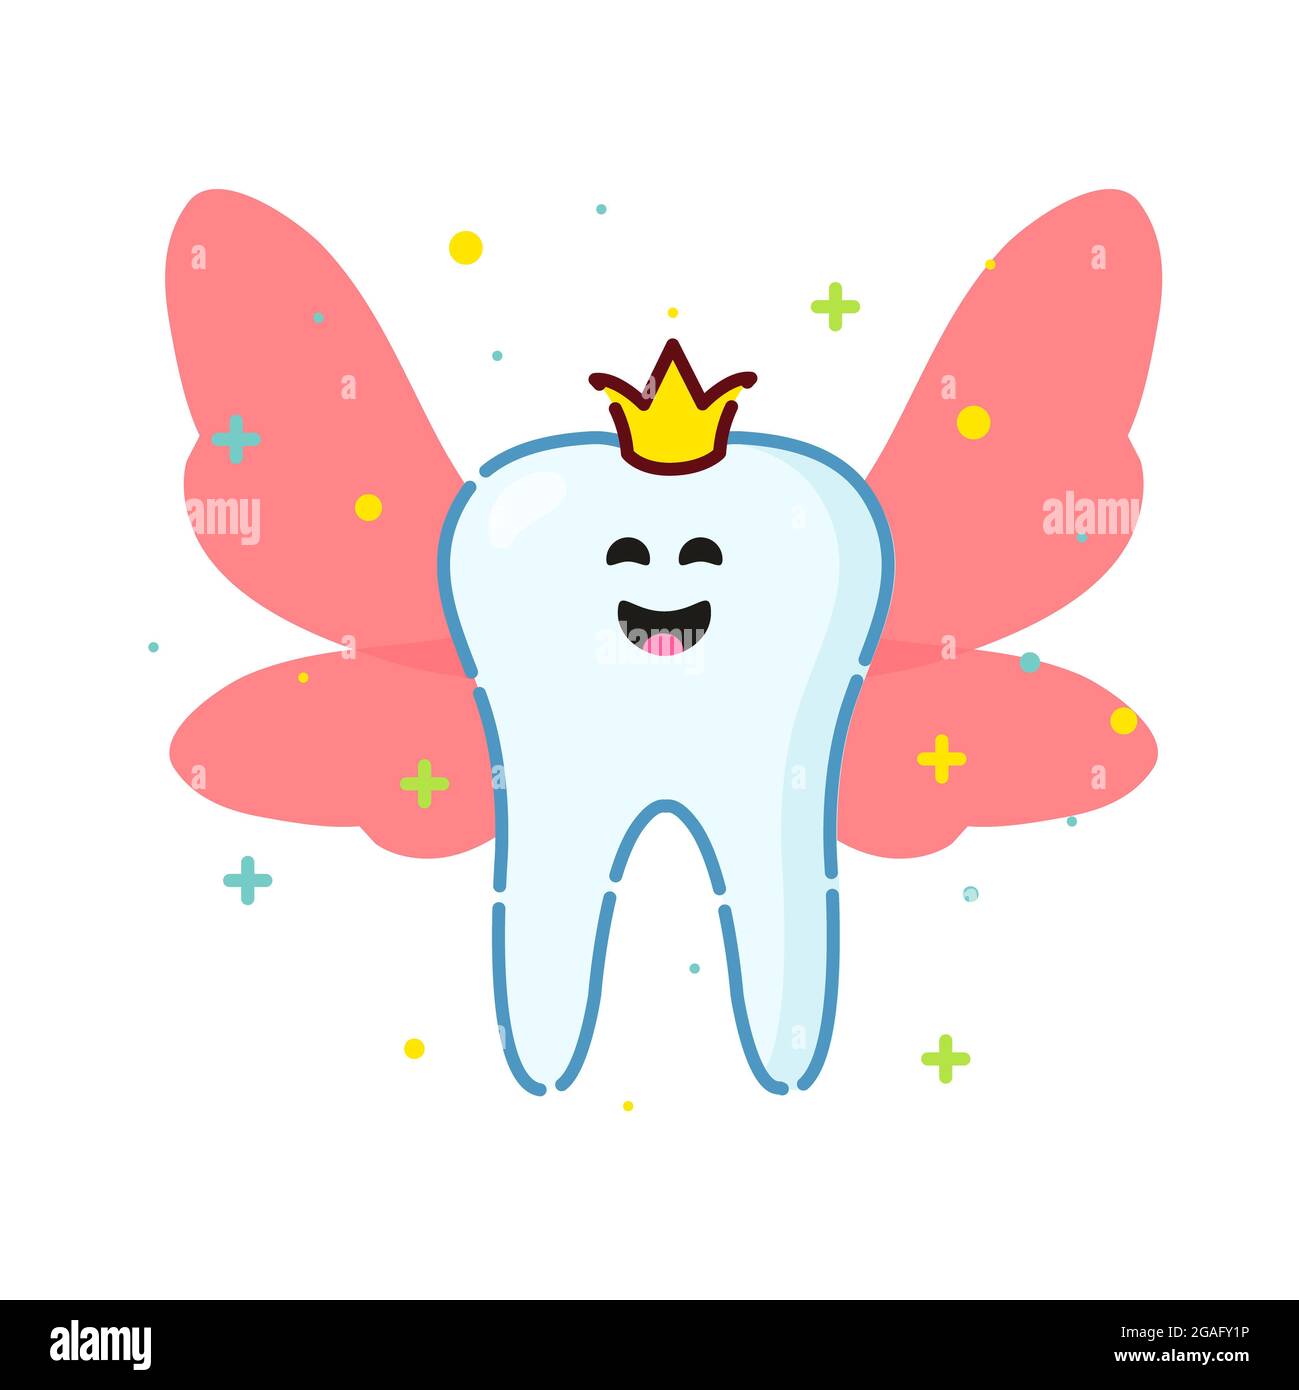 Tooth fairy, conceptual illustration Stock Photo